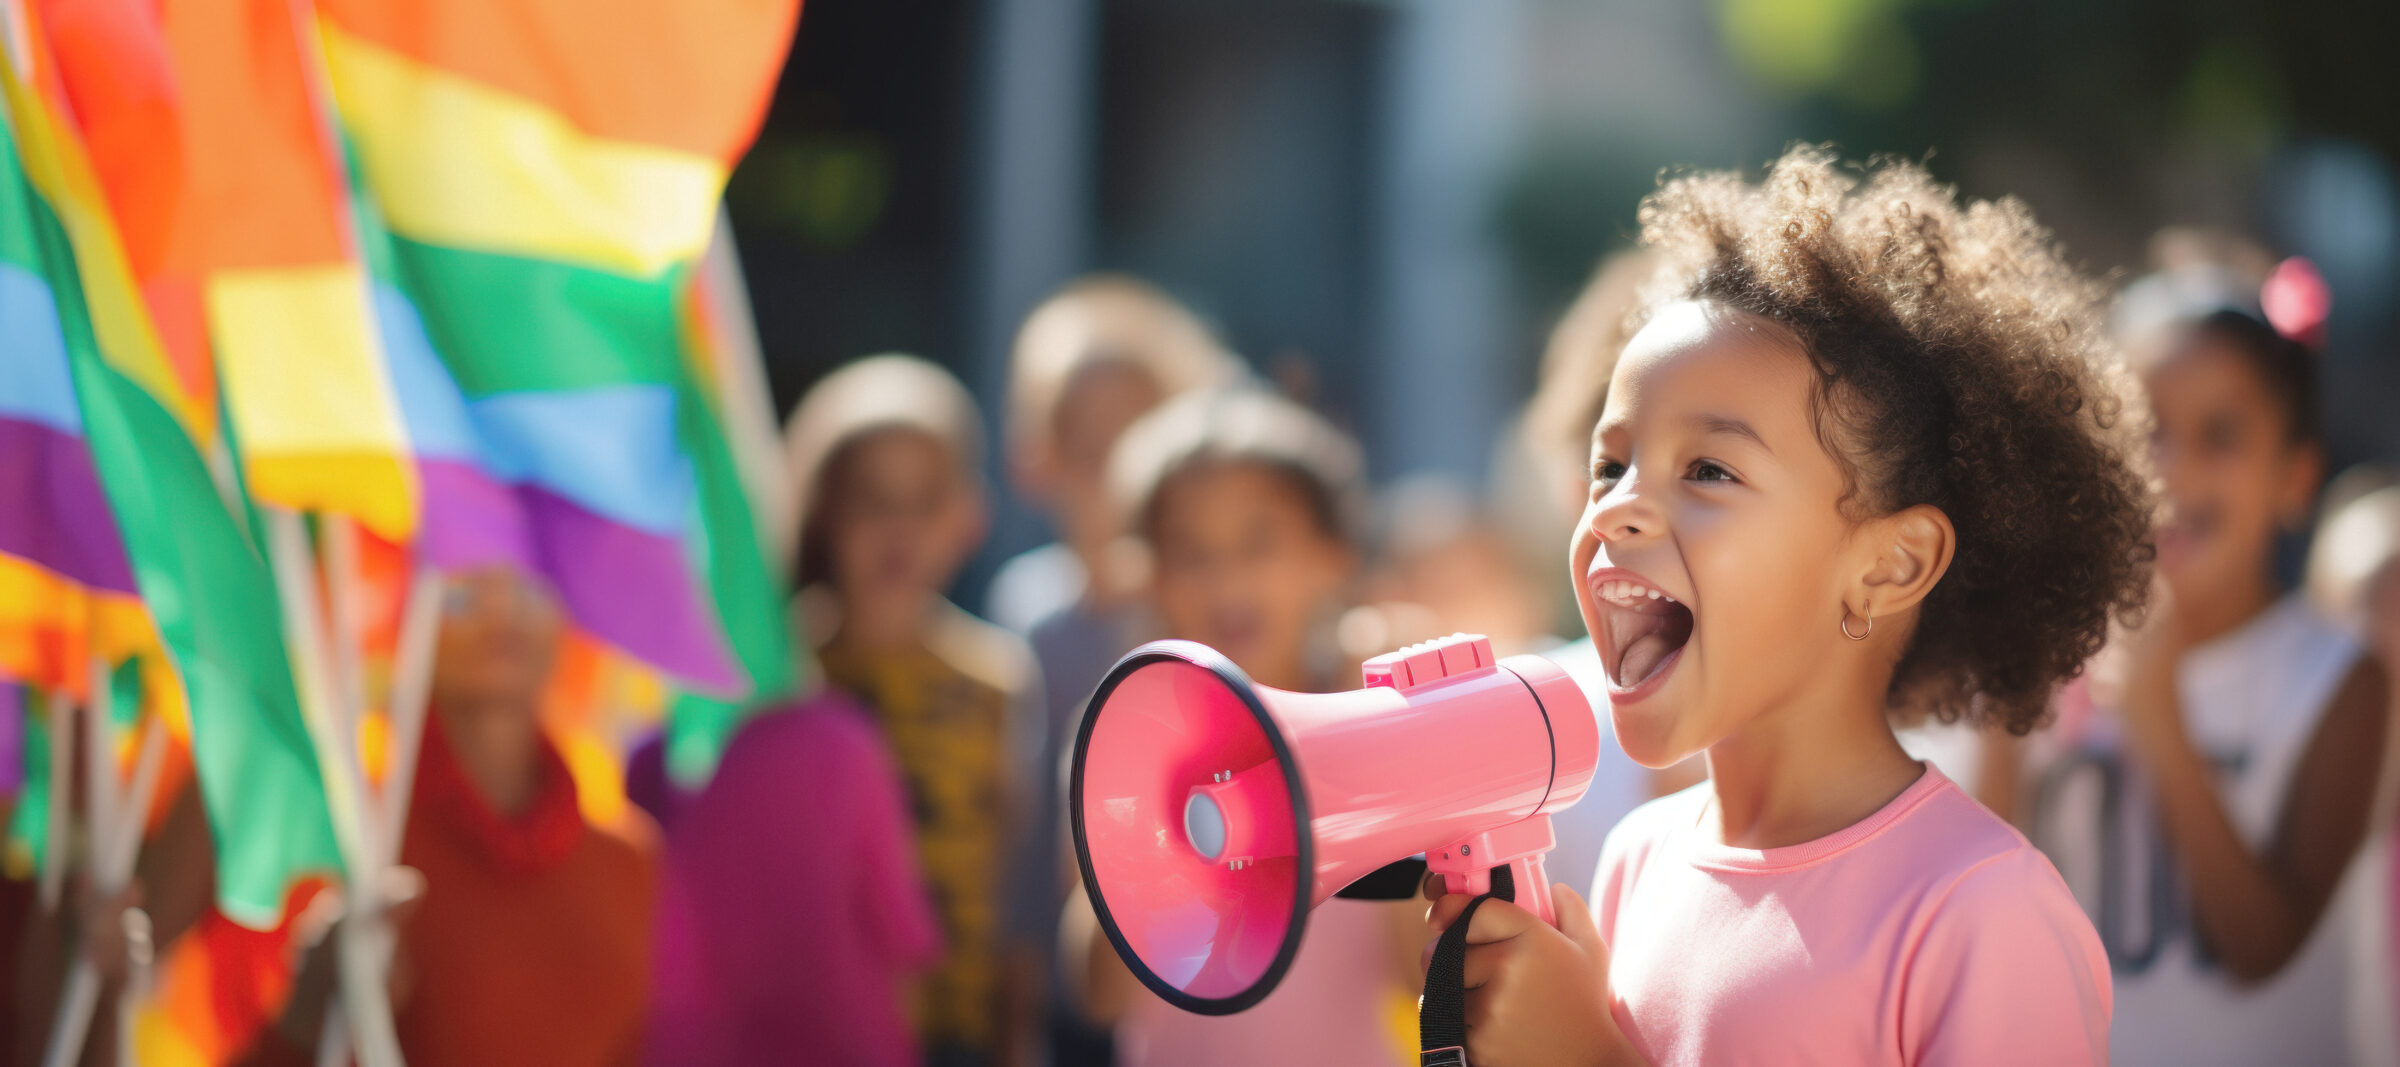 A children’s protest in which a girl speaks through a megaphone giving a message of non-violence at a demonstration for peace and the eradication of conflicts,copy space